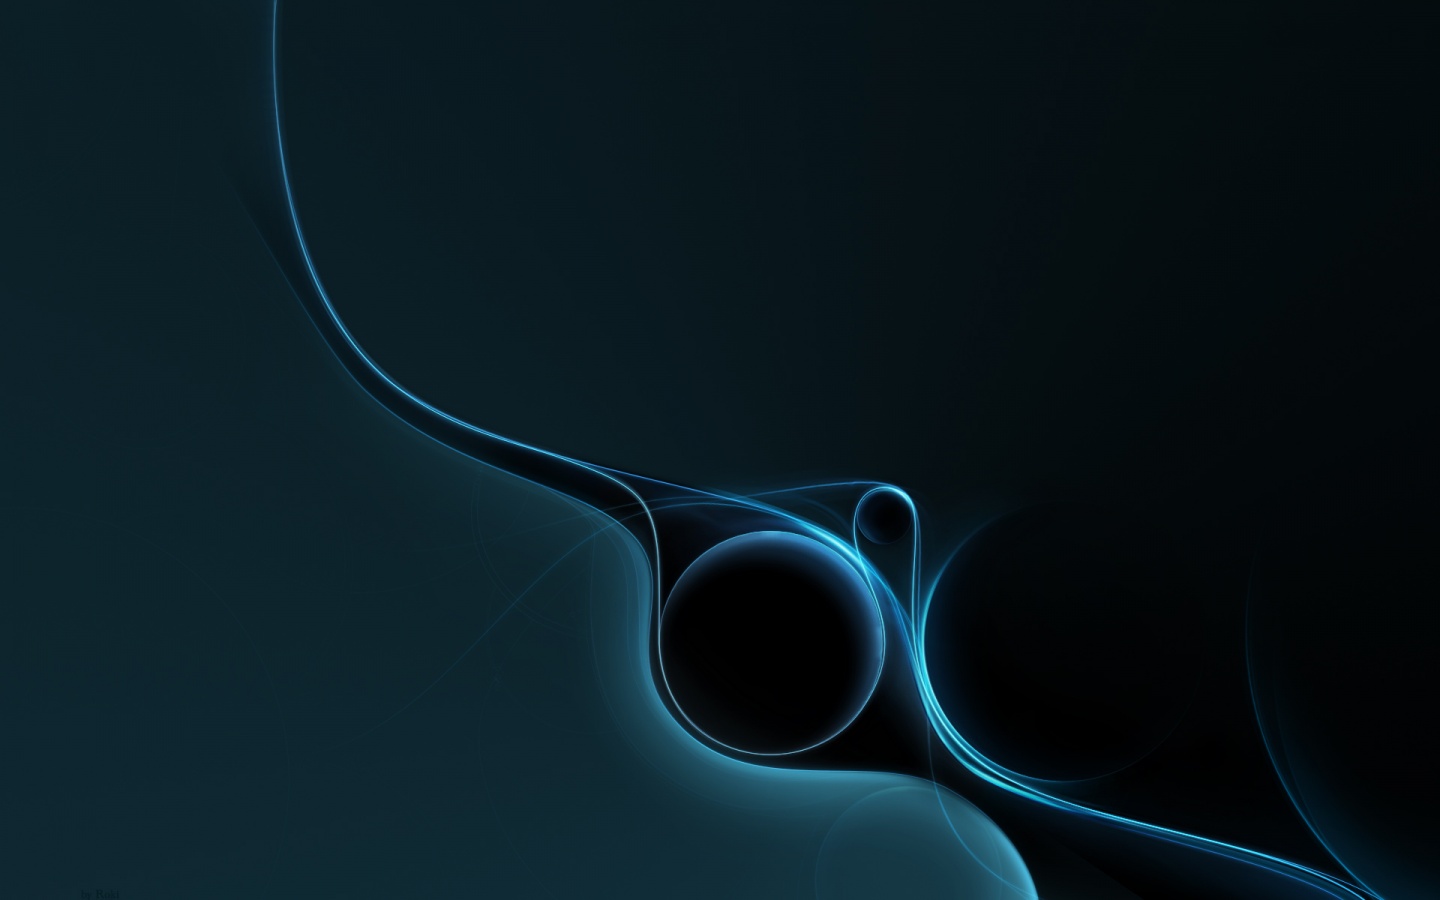 Windows Background Abstract Blue Curves Wallpaper X